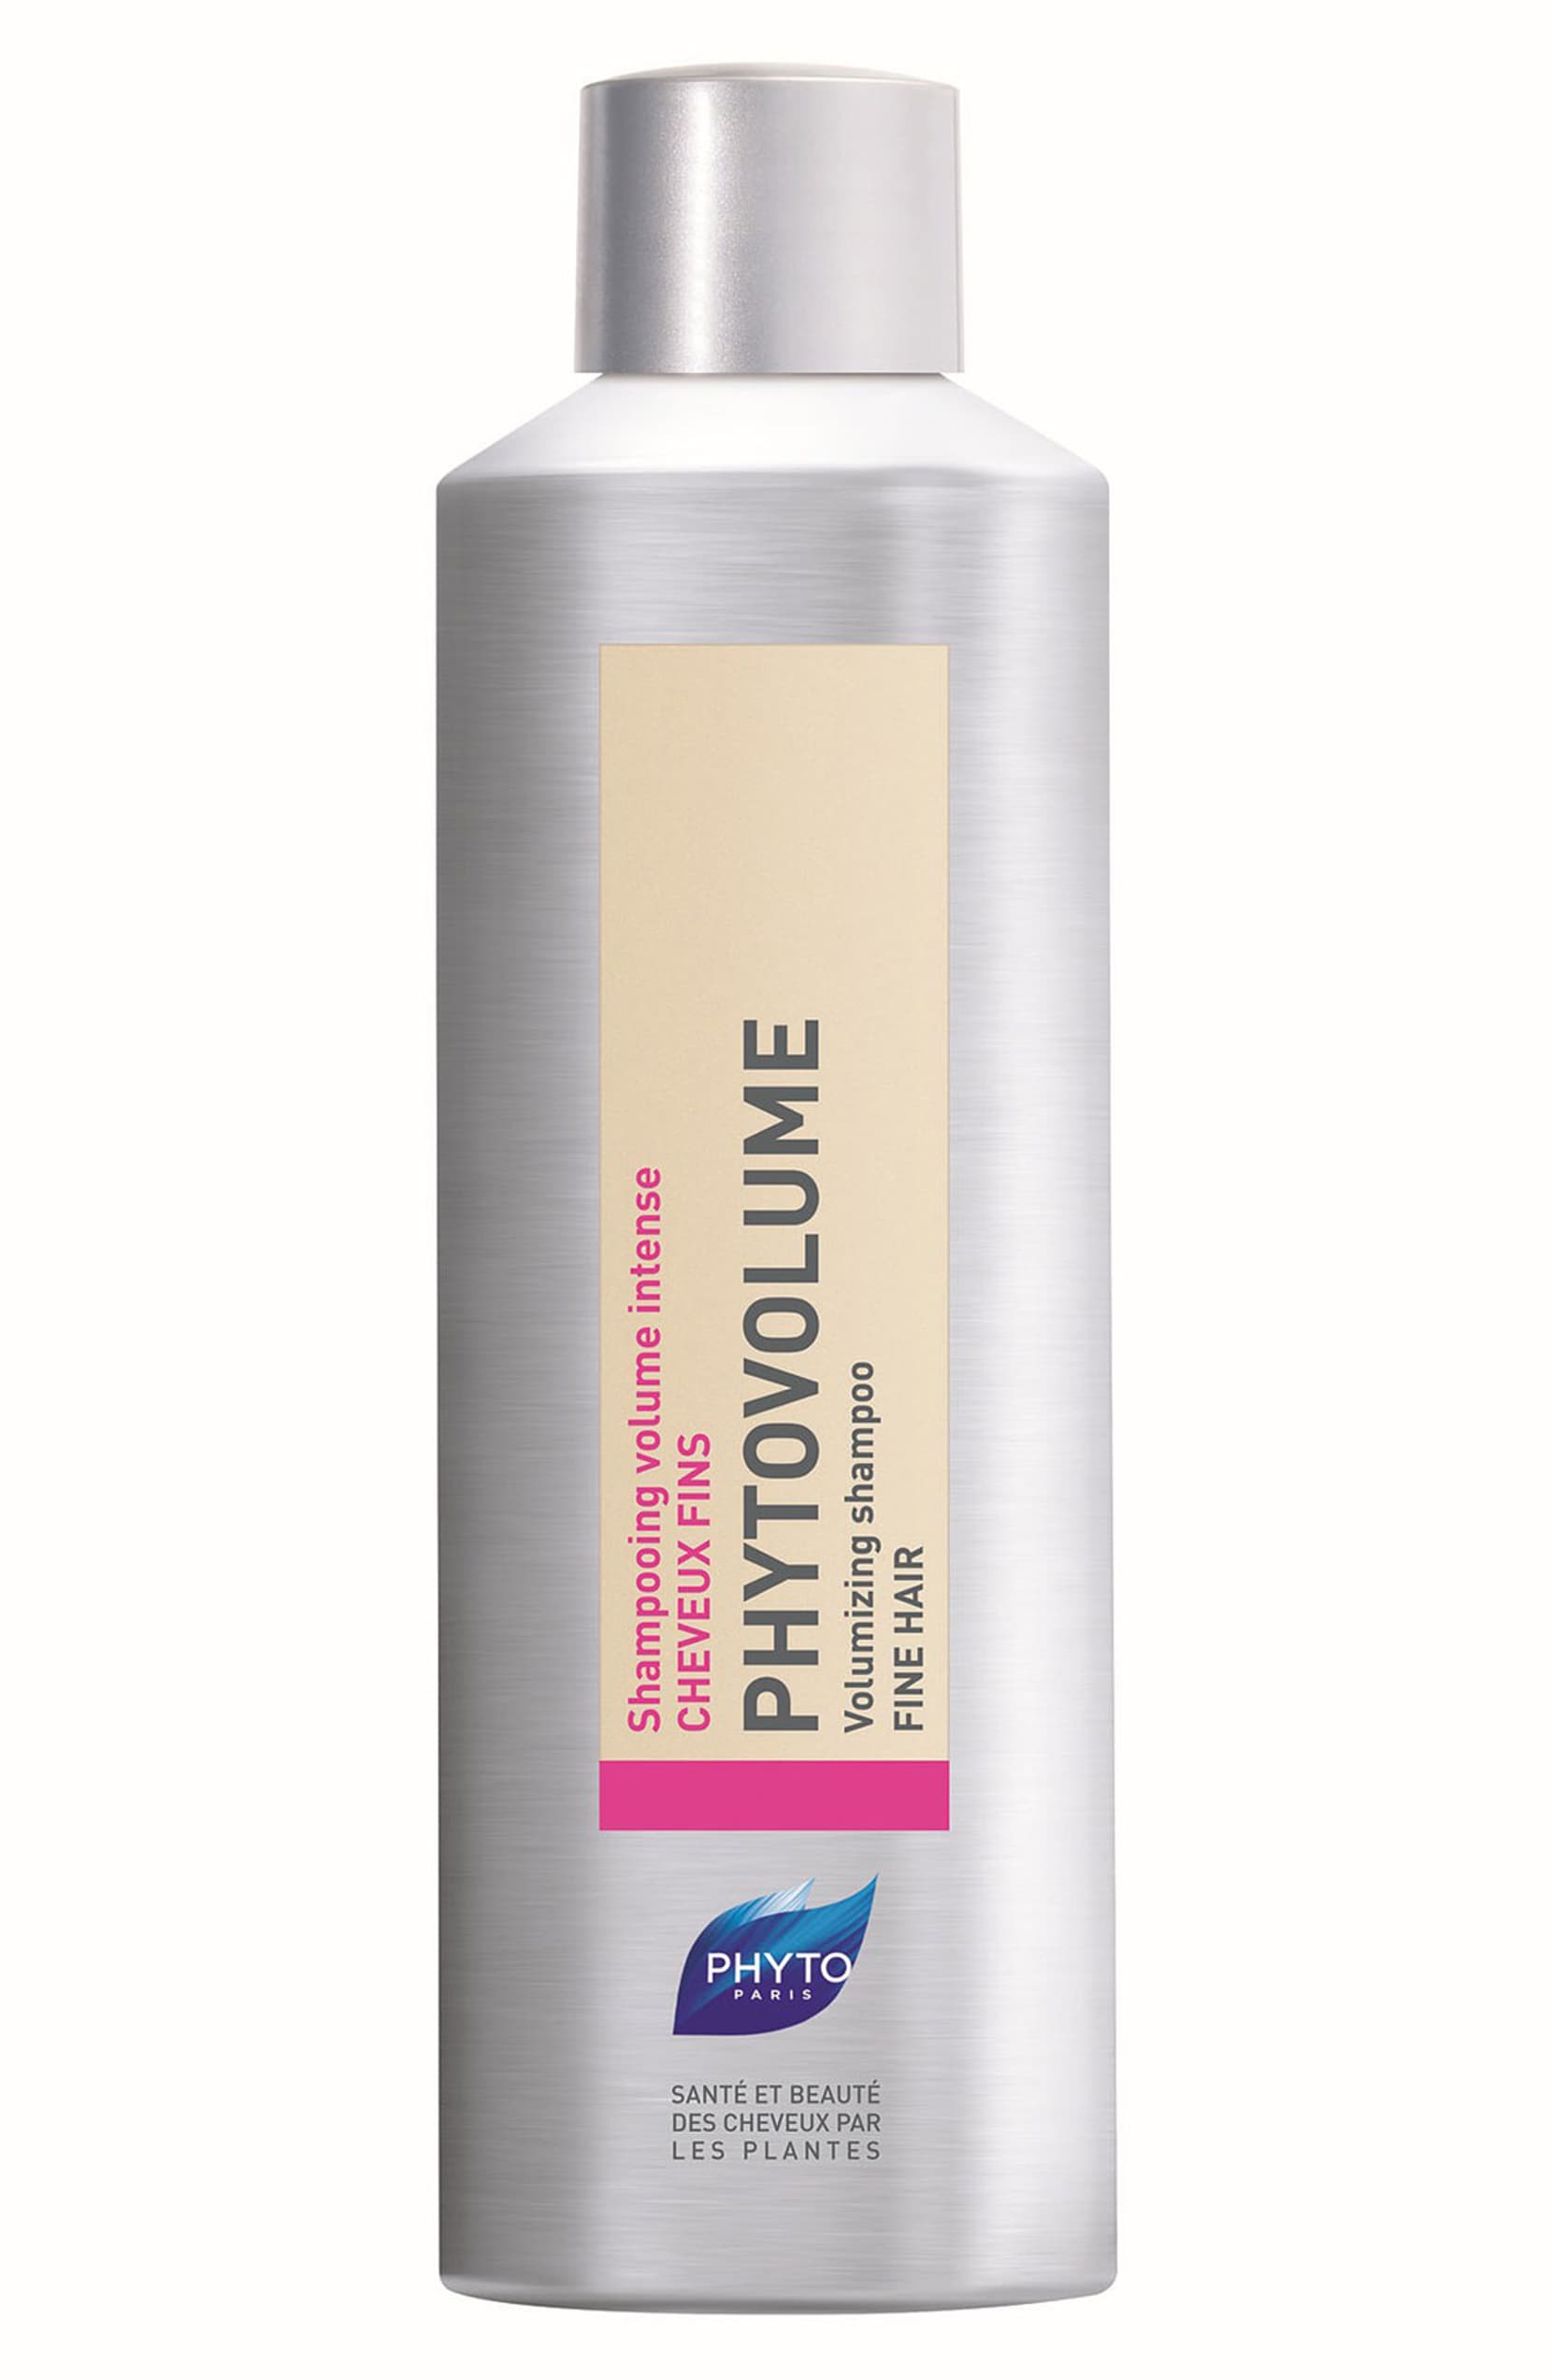 PHYTO Soins & Beauté Phytovolume (shampoing cheveux fins) 250ml